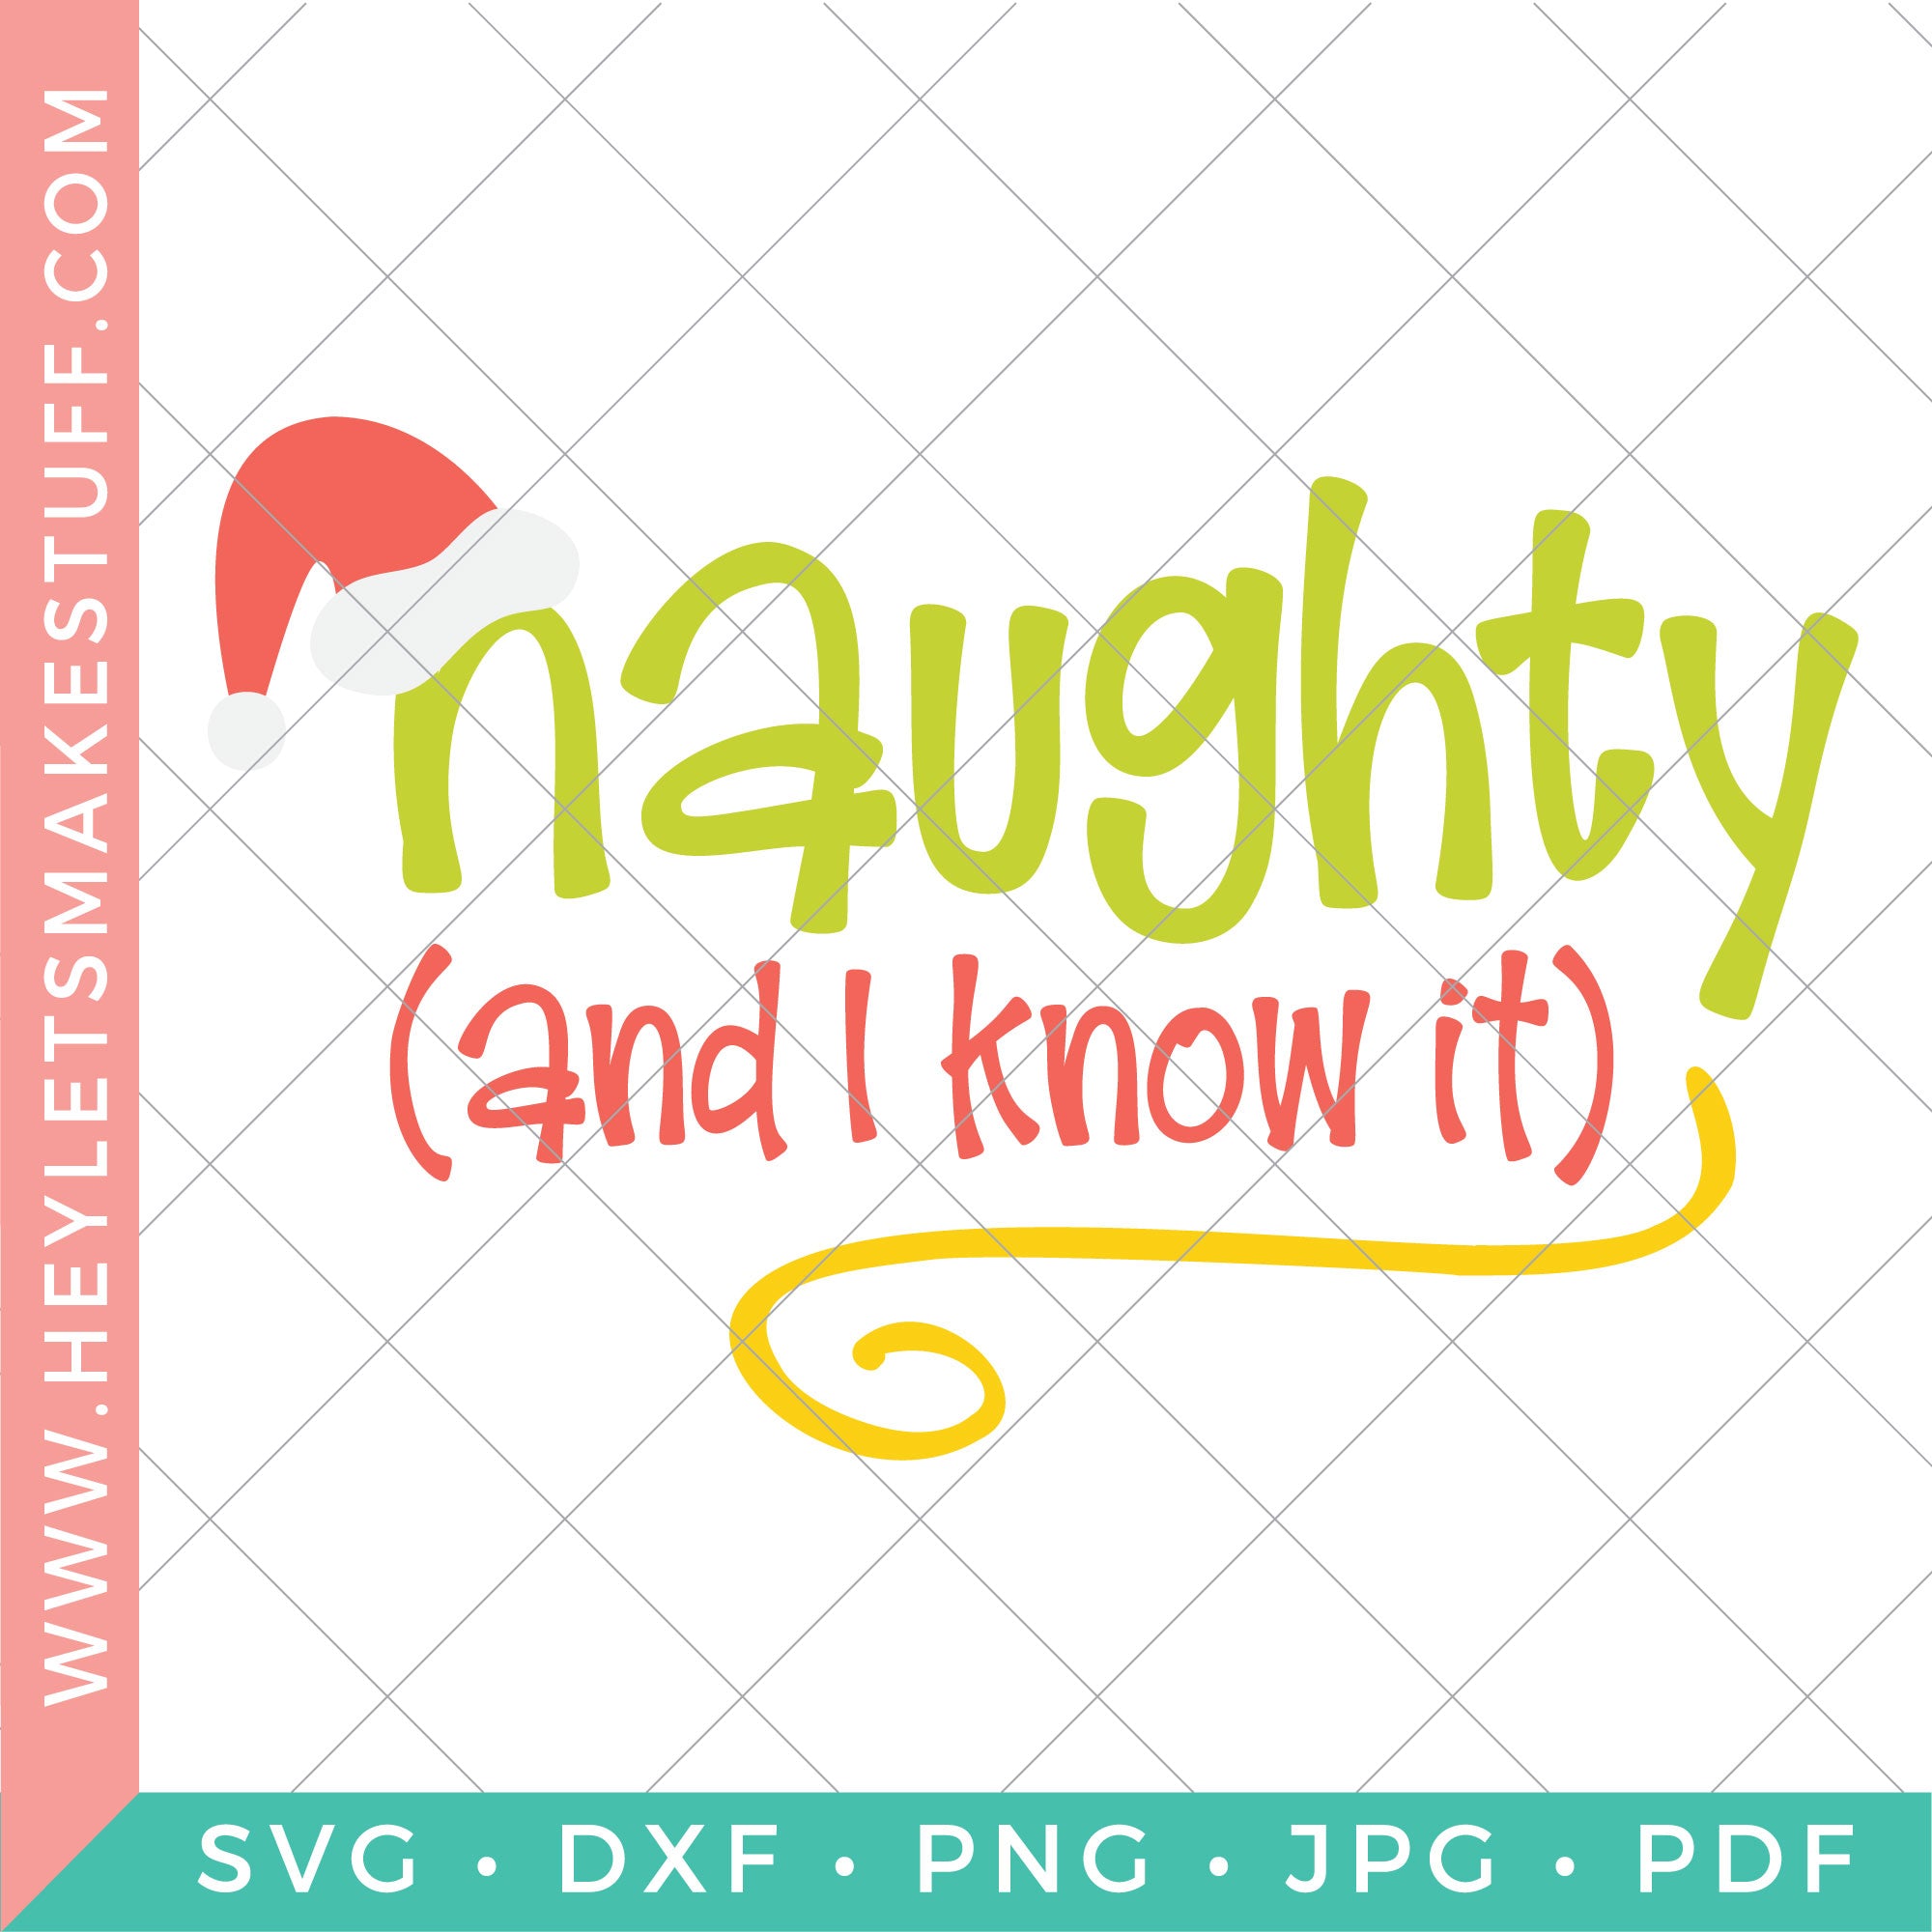 I Don't Care That I'm On the Naughty List [SVG, DXF], Cutting Machine &  Laser Cutting Designs